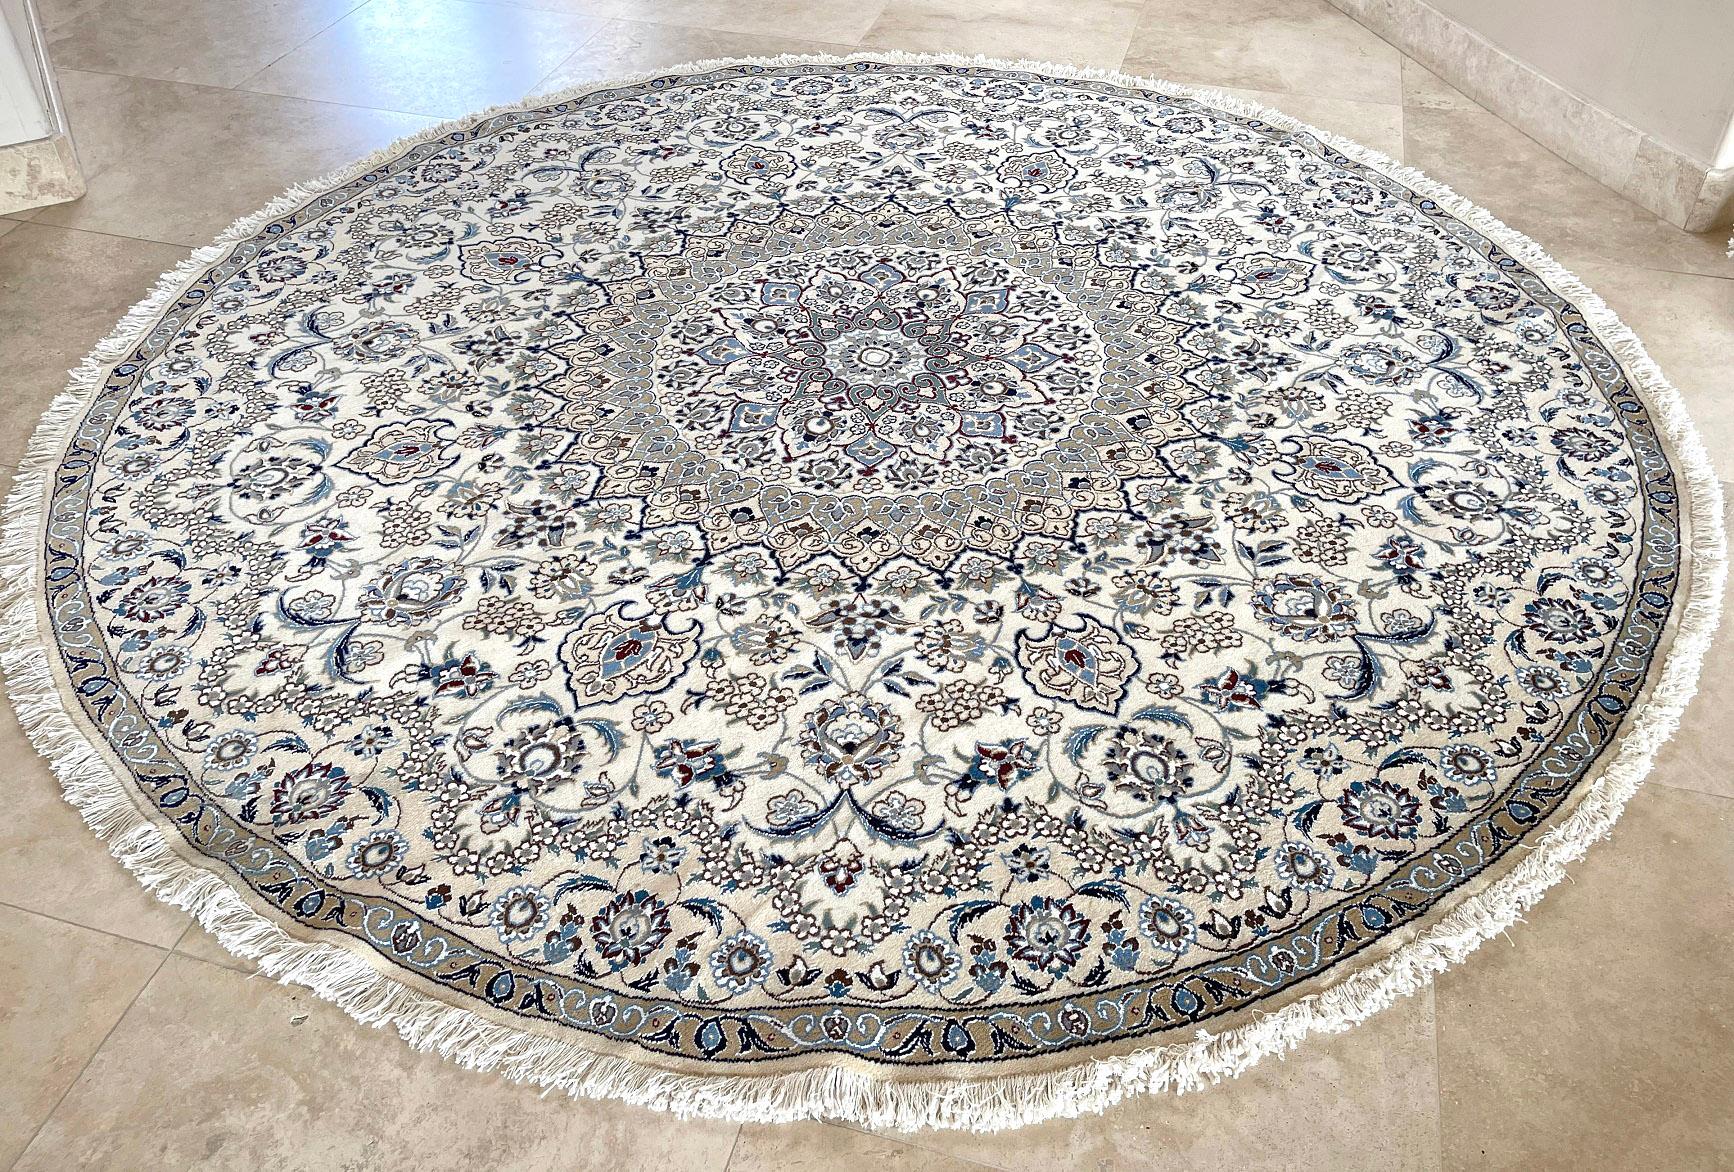 This authentic Persian round hand-made Nain (9 LA) rug has wool and silk pile with cotton foundation. Nain is a city in Iran that is well known for producing fine handmade rug. This rug has medallion floral design. The base color and border are